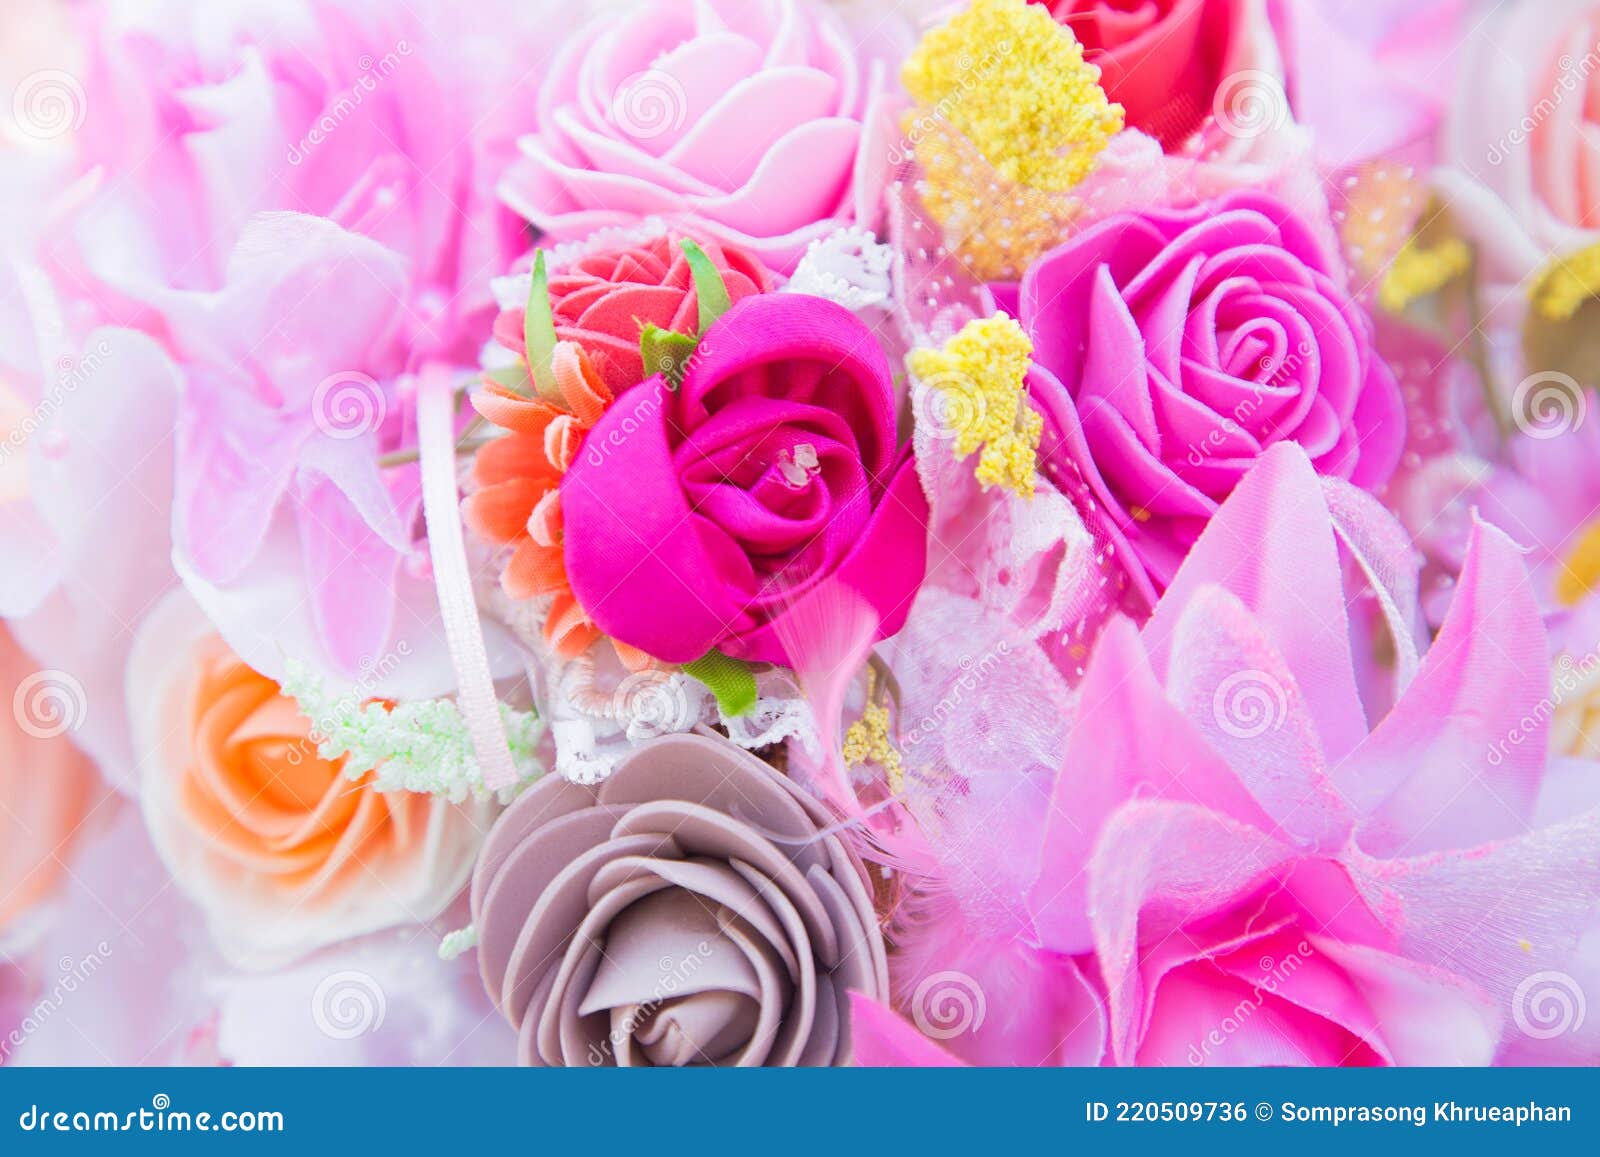 Bunch of Flowers,flower Bouquets,flowers Background Stock Photo - Image ...